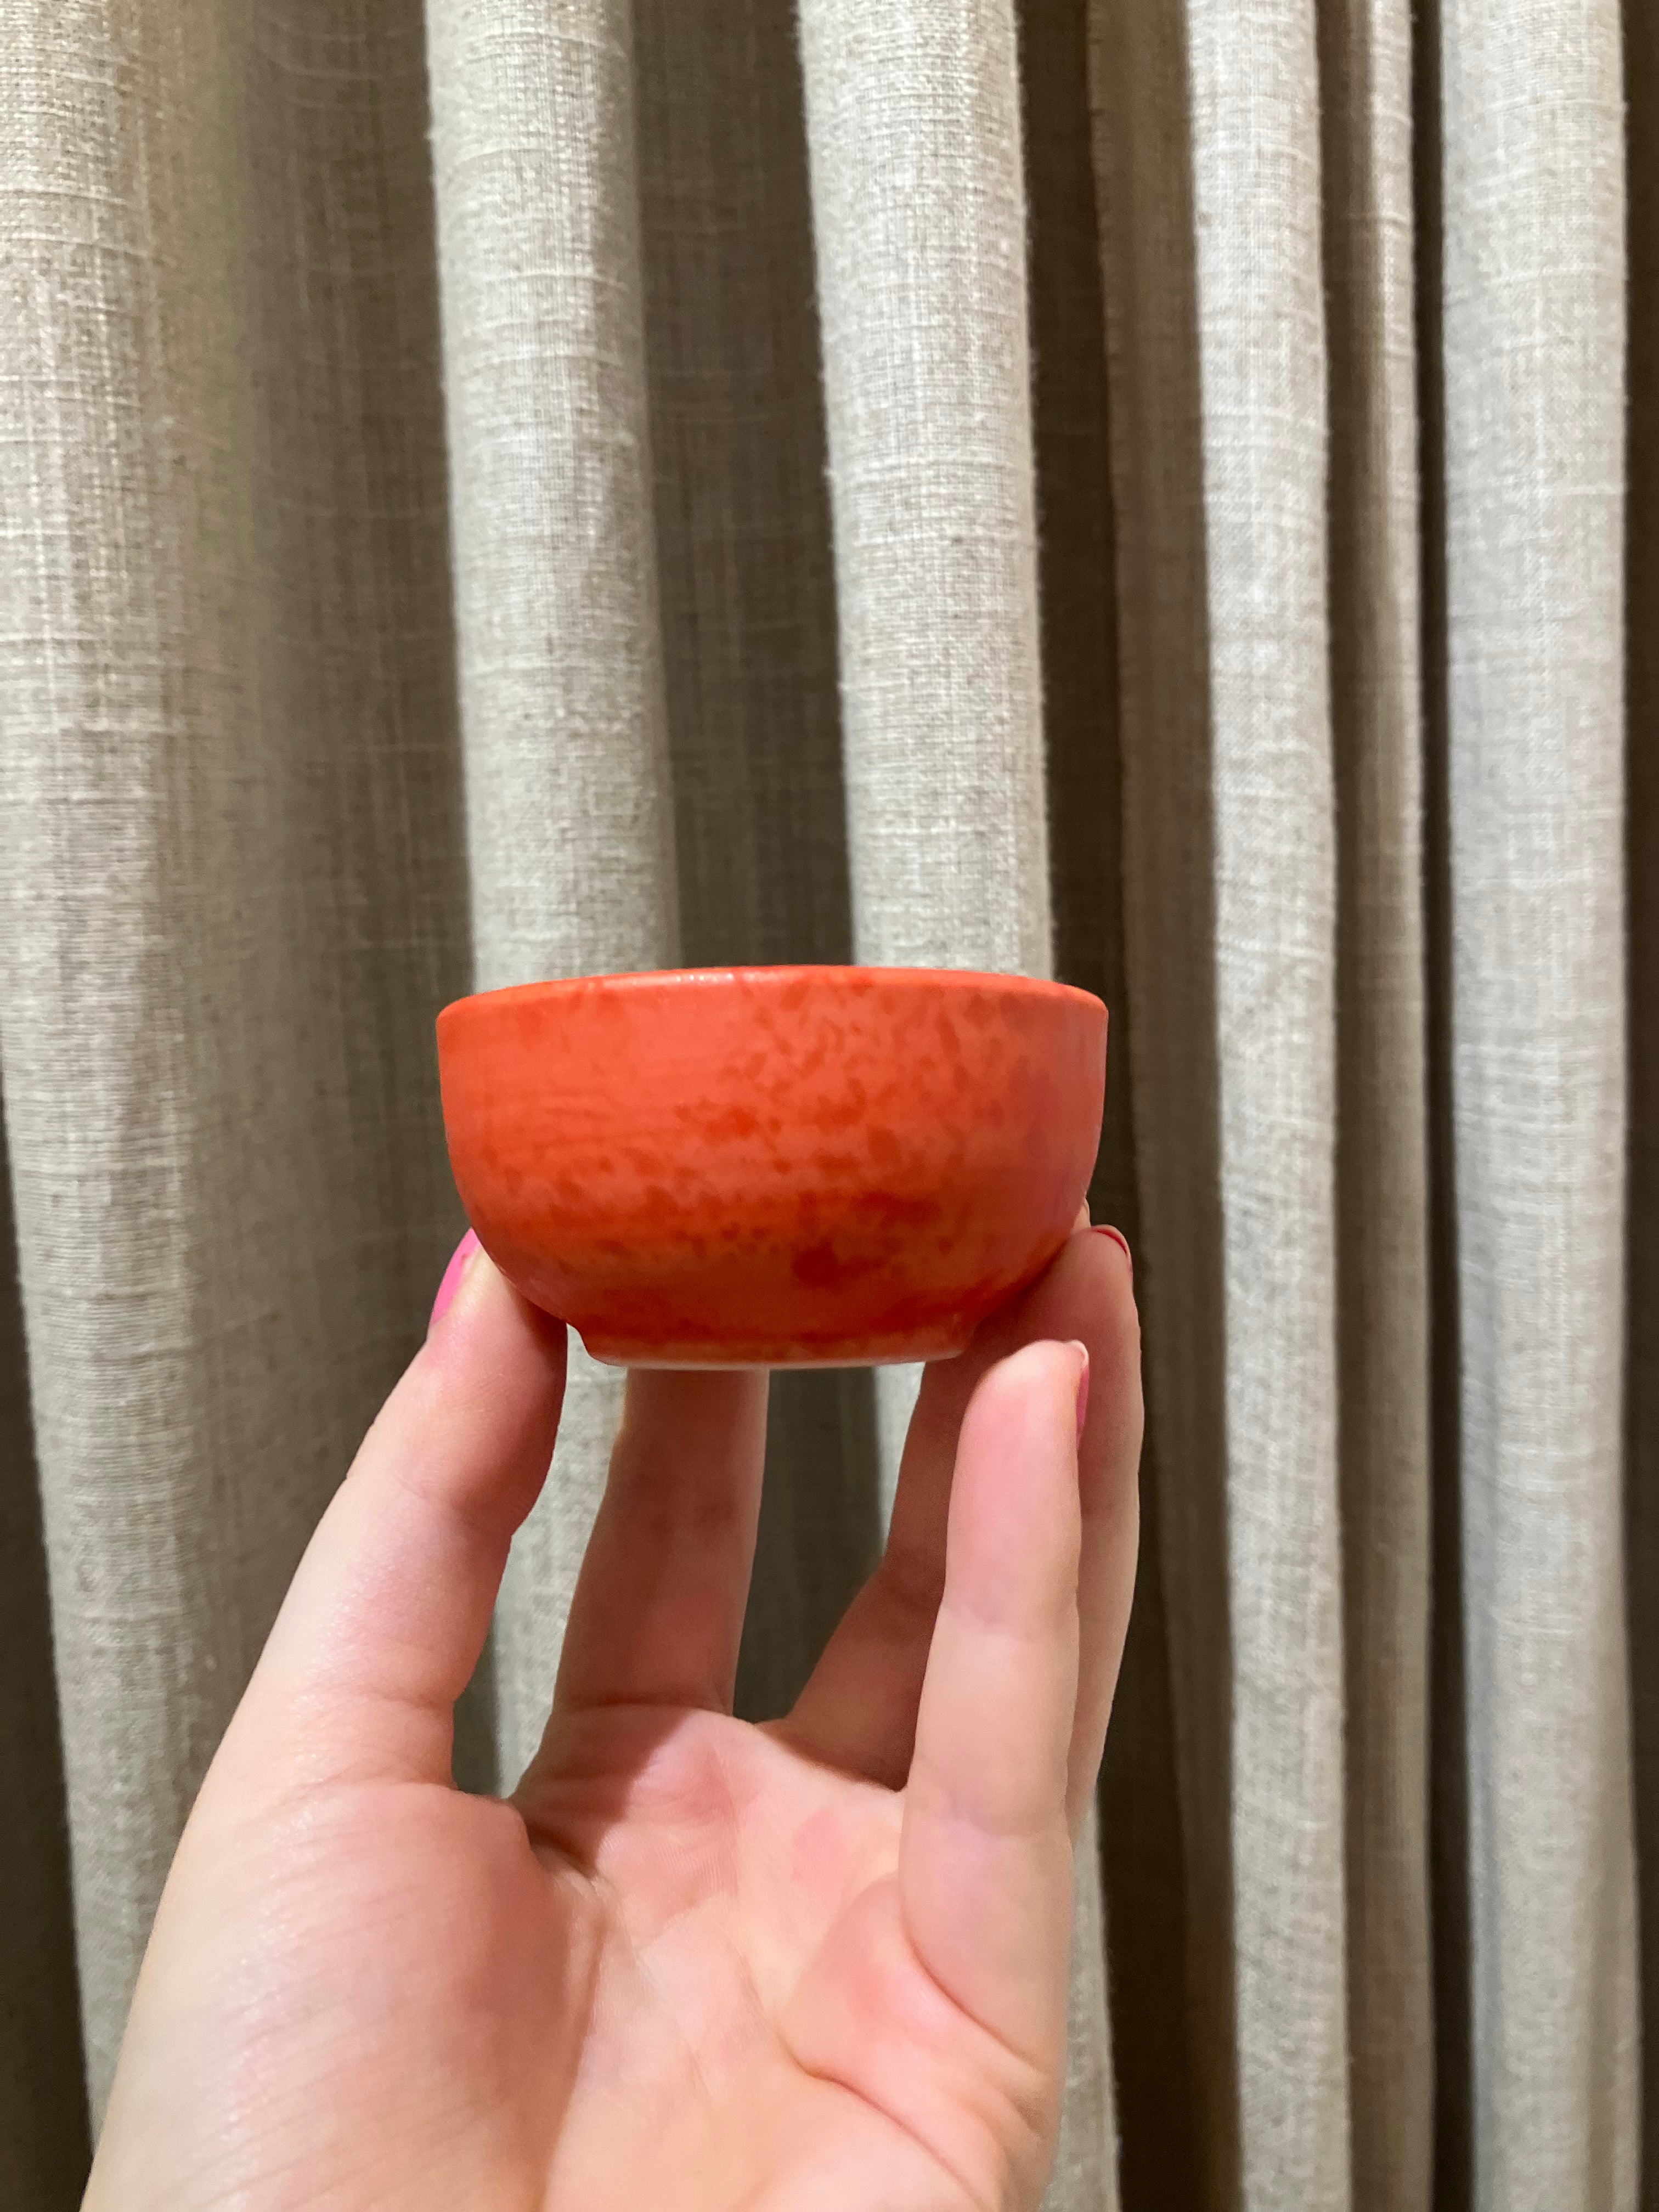 Small red bowl with shiny spots